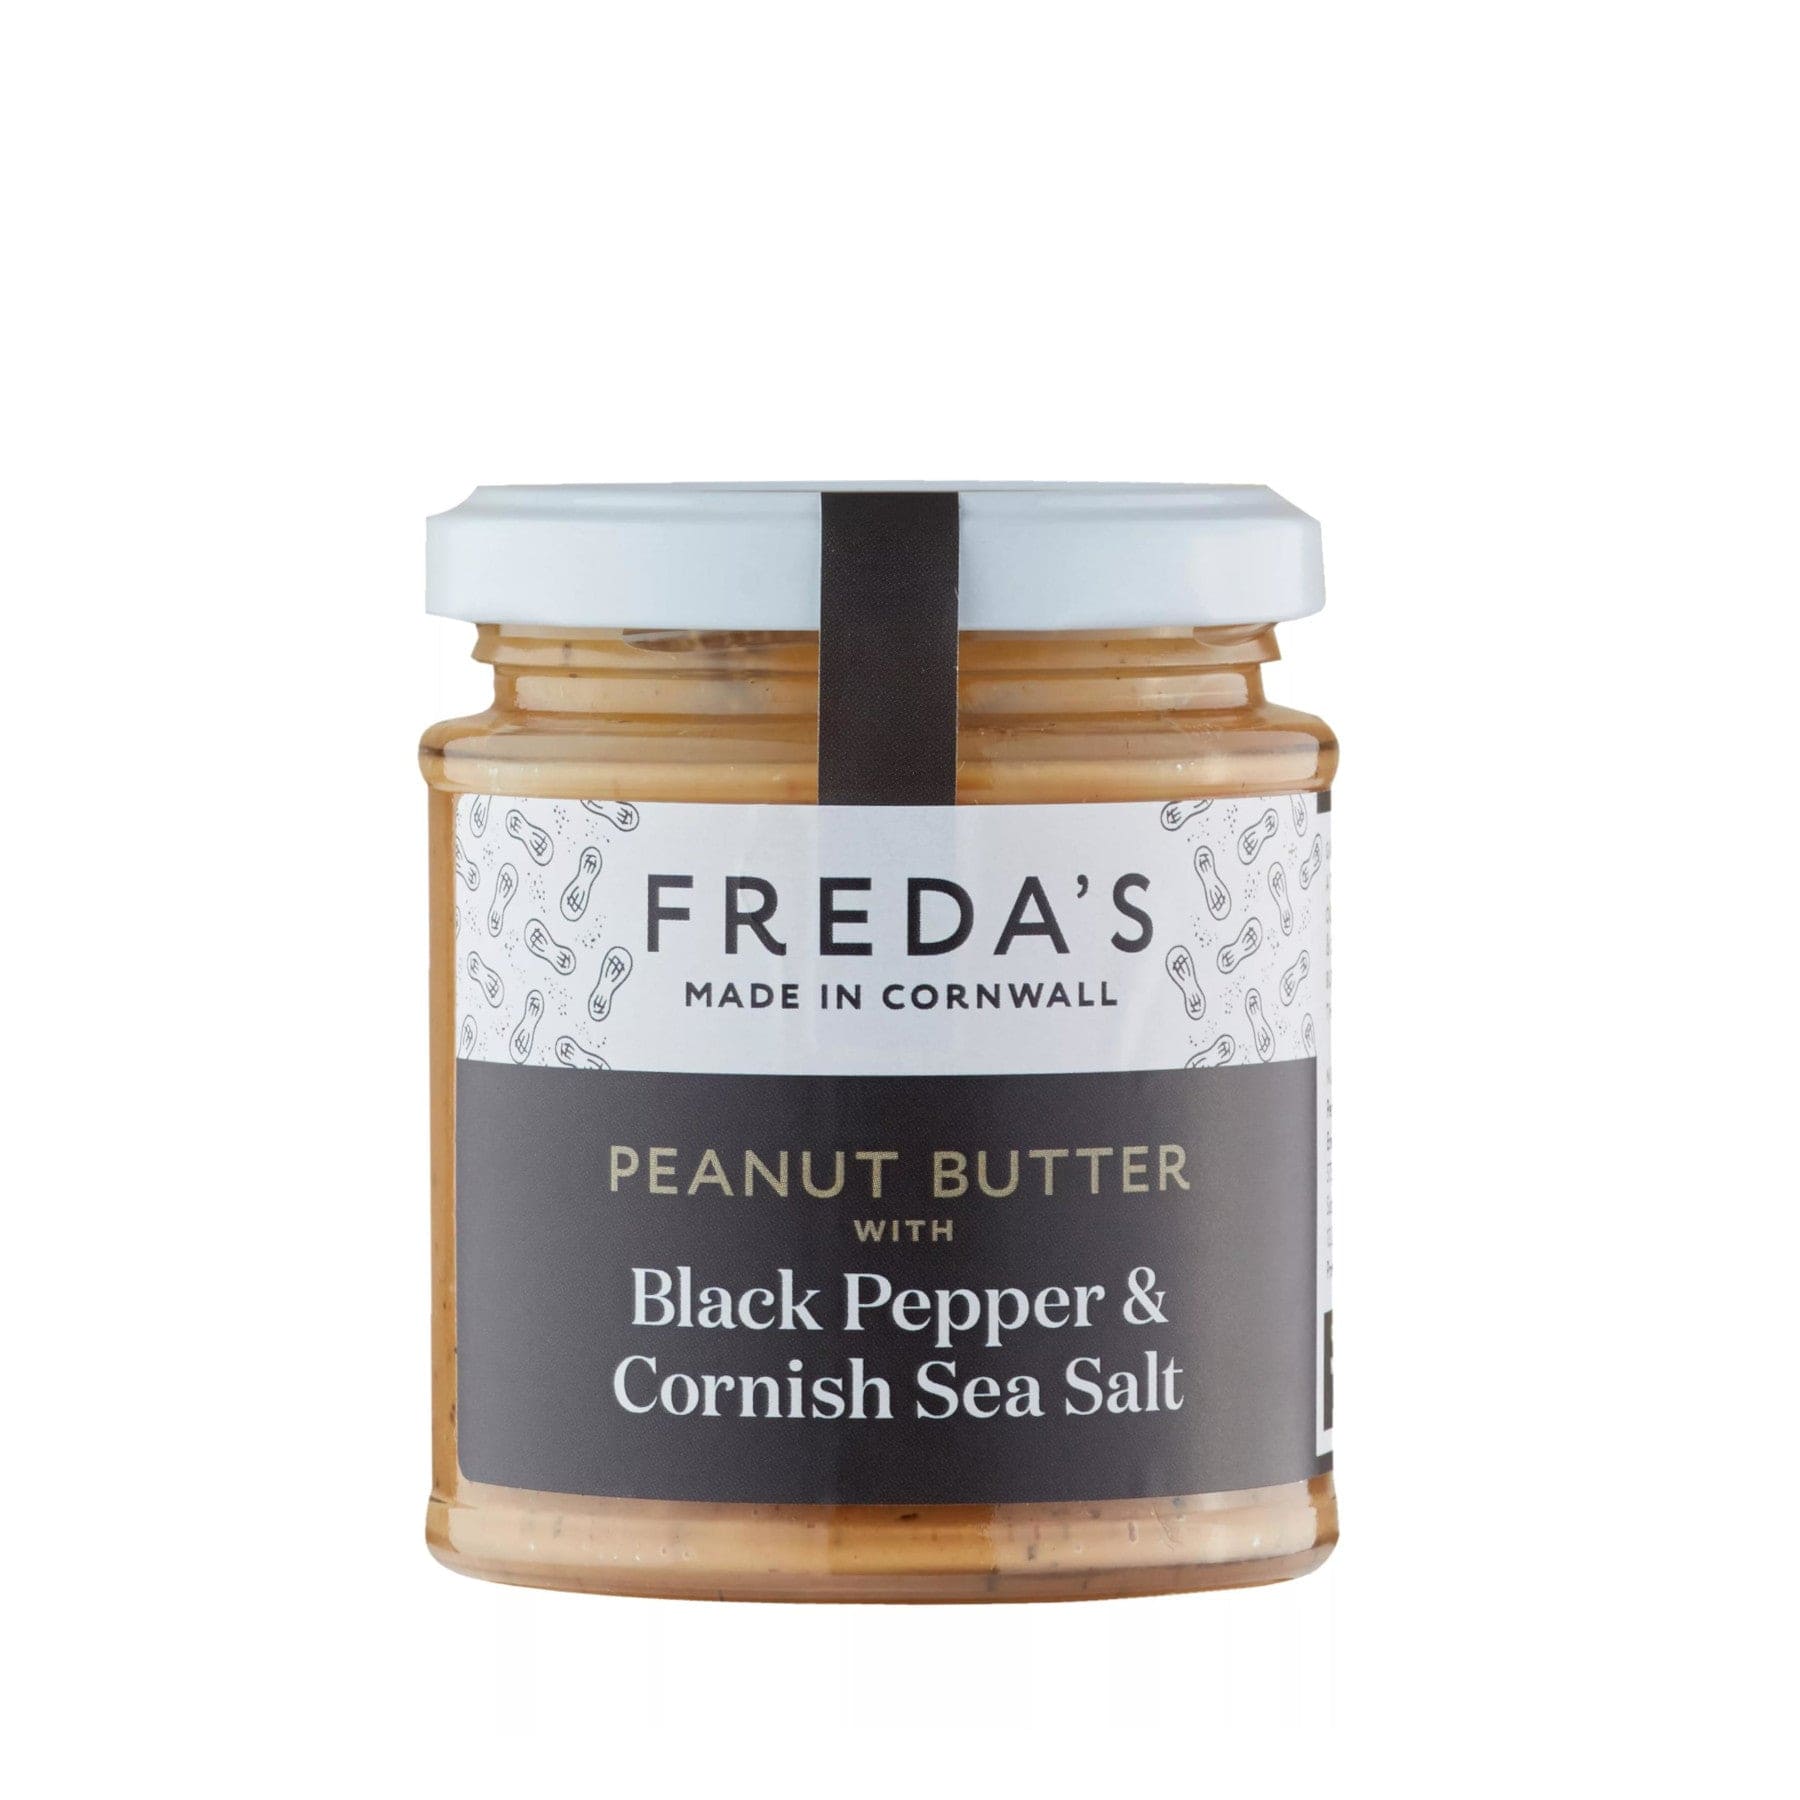 Freda's Peanut Butter with Black Pepper and Cornish Sea Salt, glass jar product packaging on a white background.